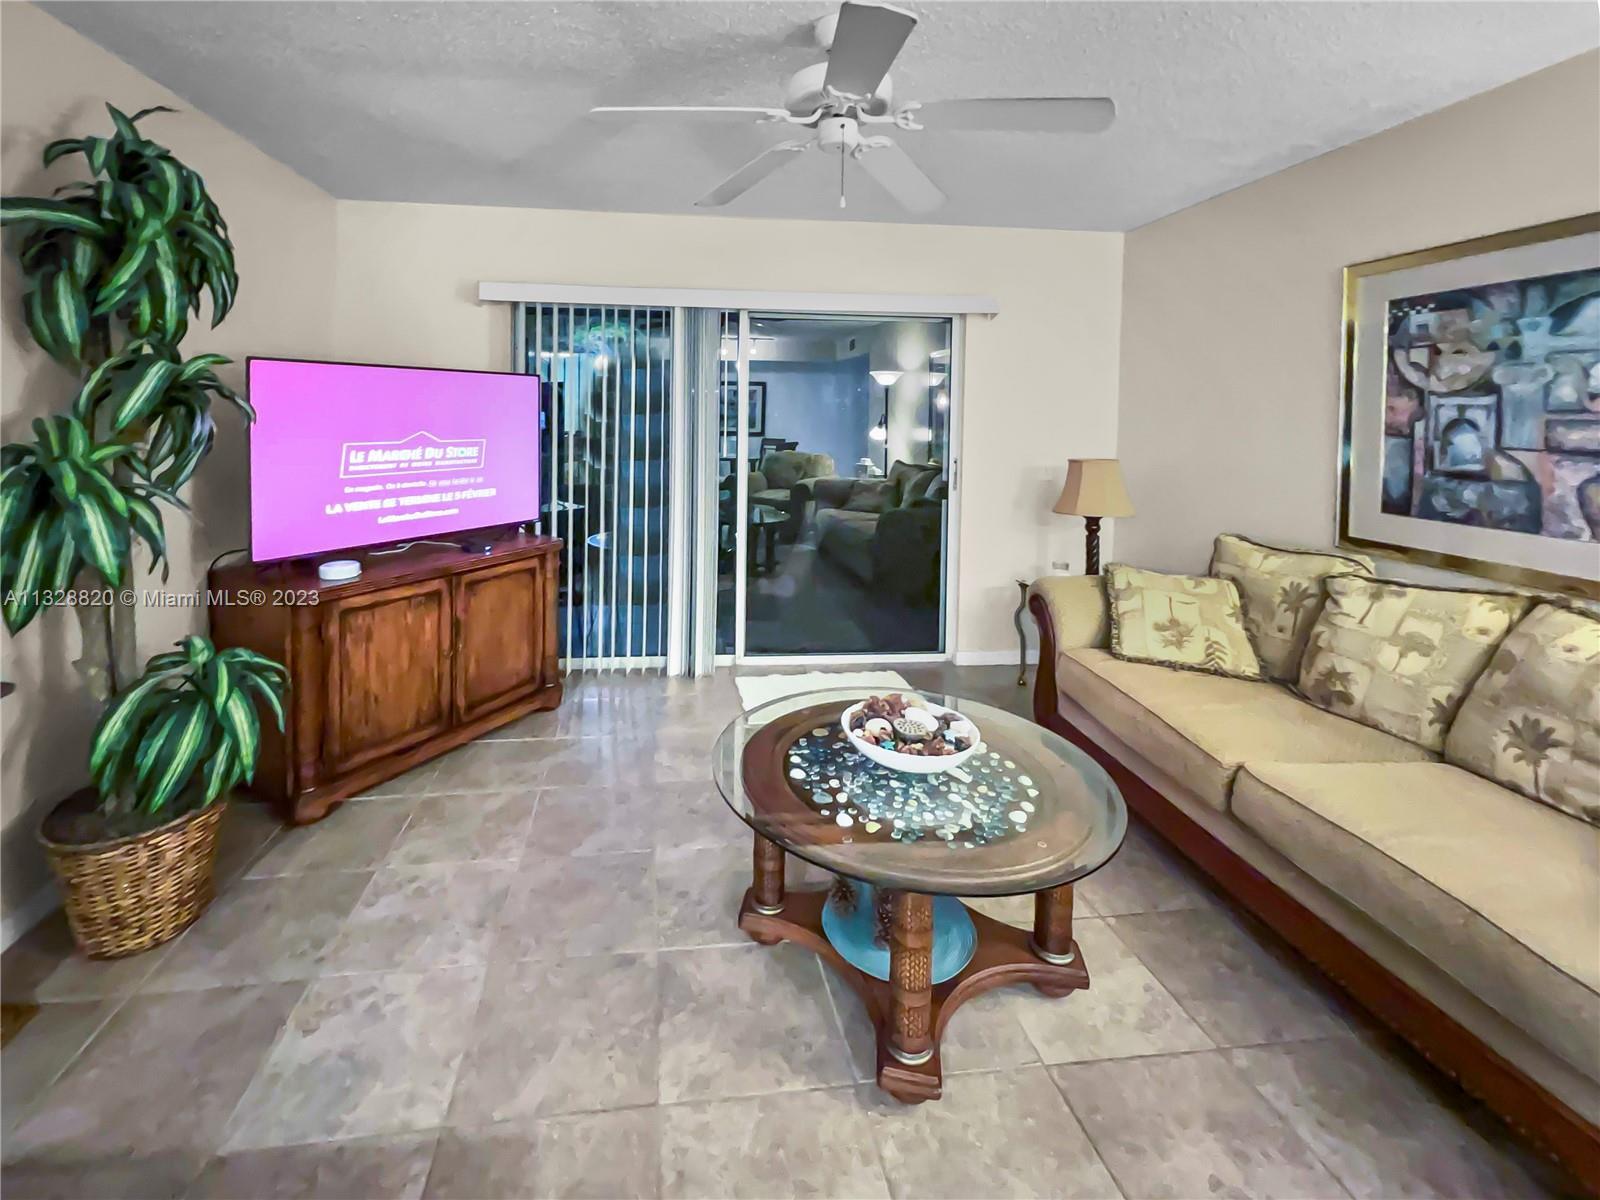 AMAZING FURNISHED 3 bedrooms / 2 bath unit located in the gated community of Grand Isles. This model